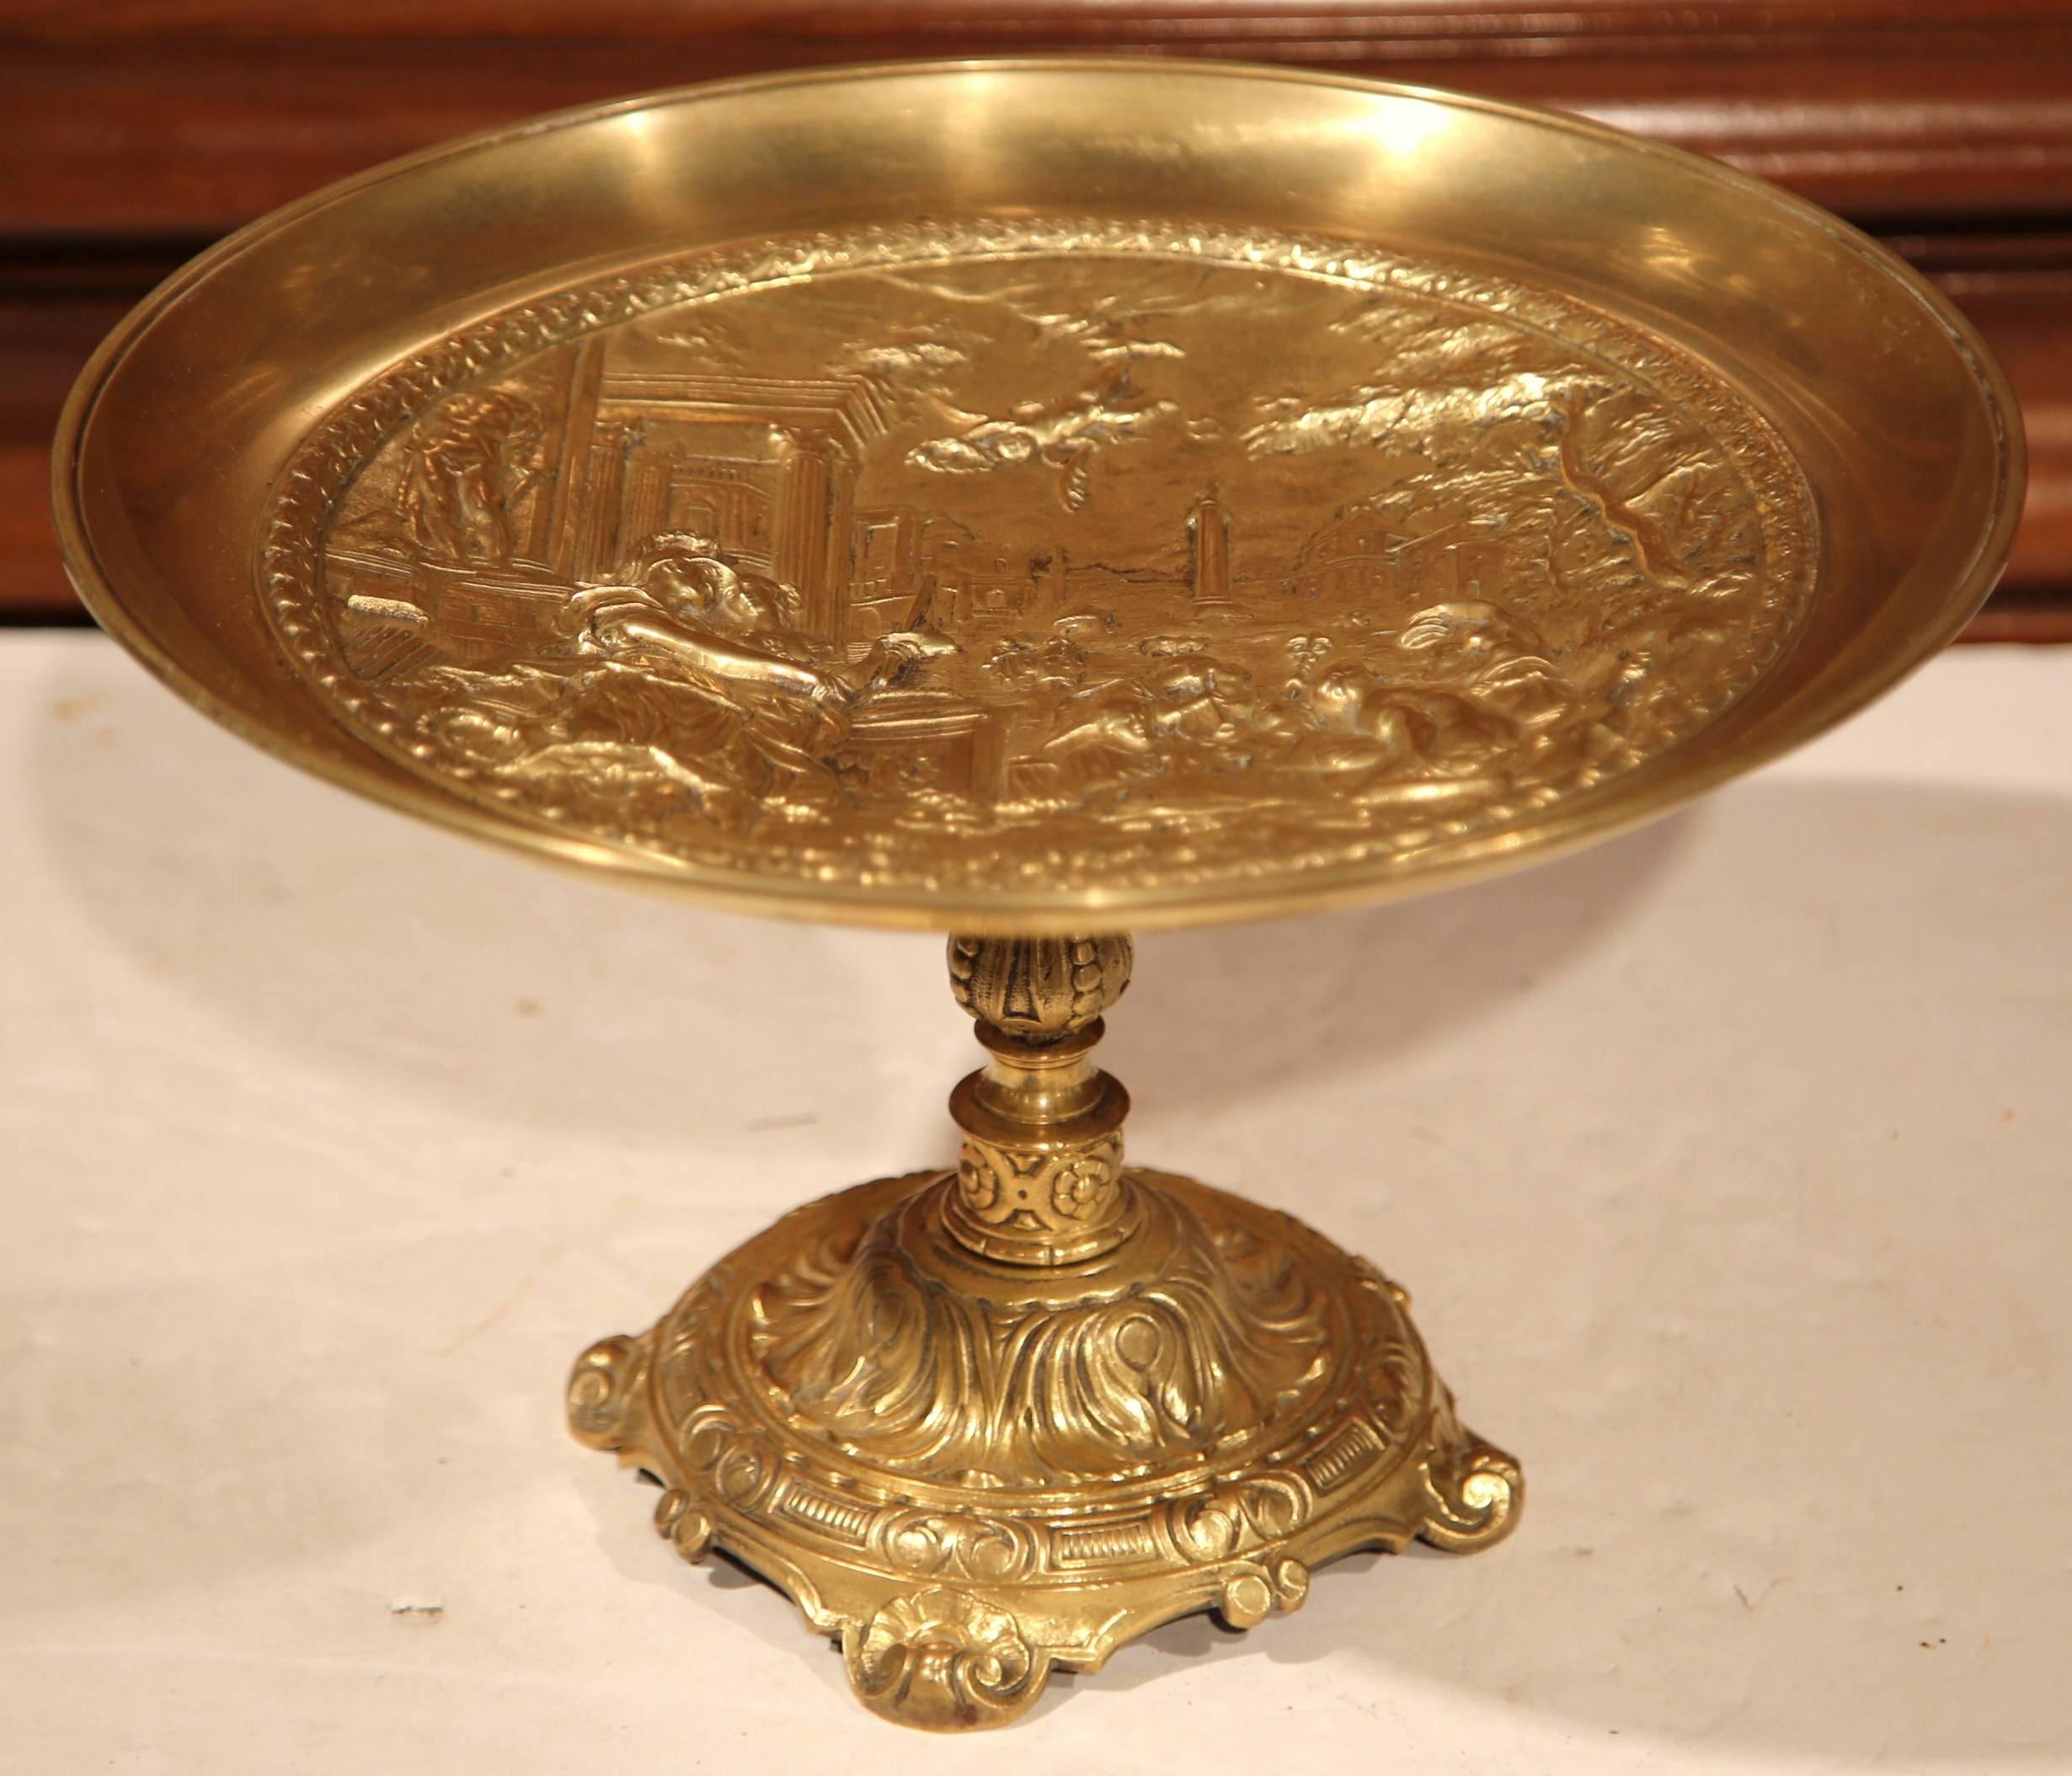 This elegant, antique bronze centrepiece was crafted in France, circa 1920. The shallow dish sits on an intricate base with scroll feet, and the inside of the bowl is decorated with a traditional Roman scene with muses talking, reading and dancing.